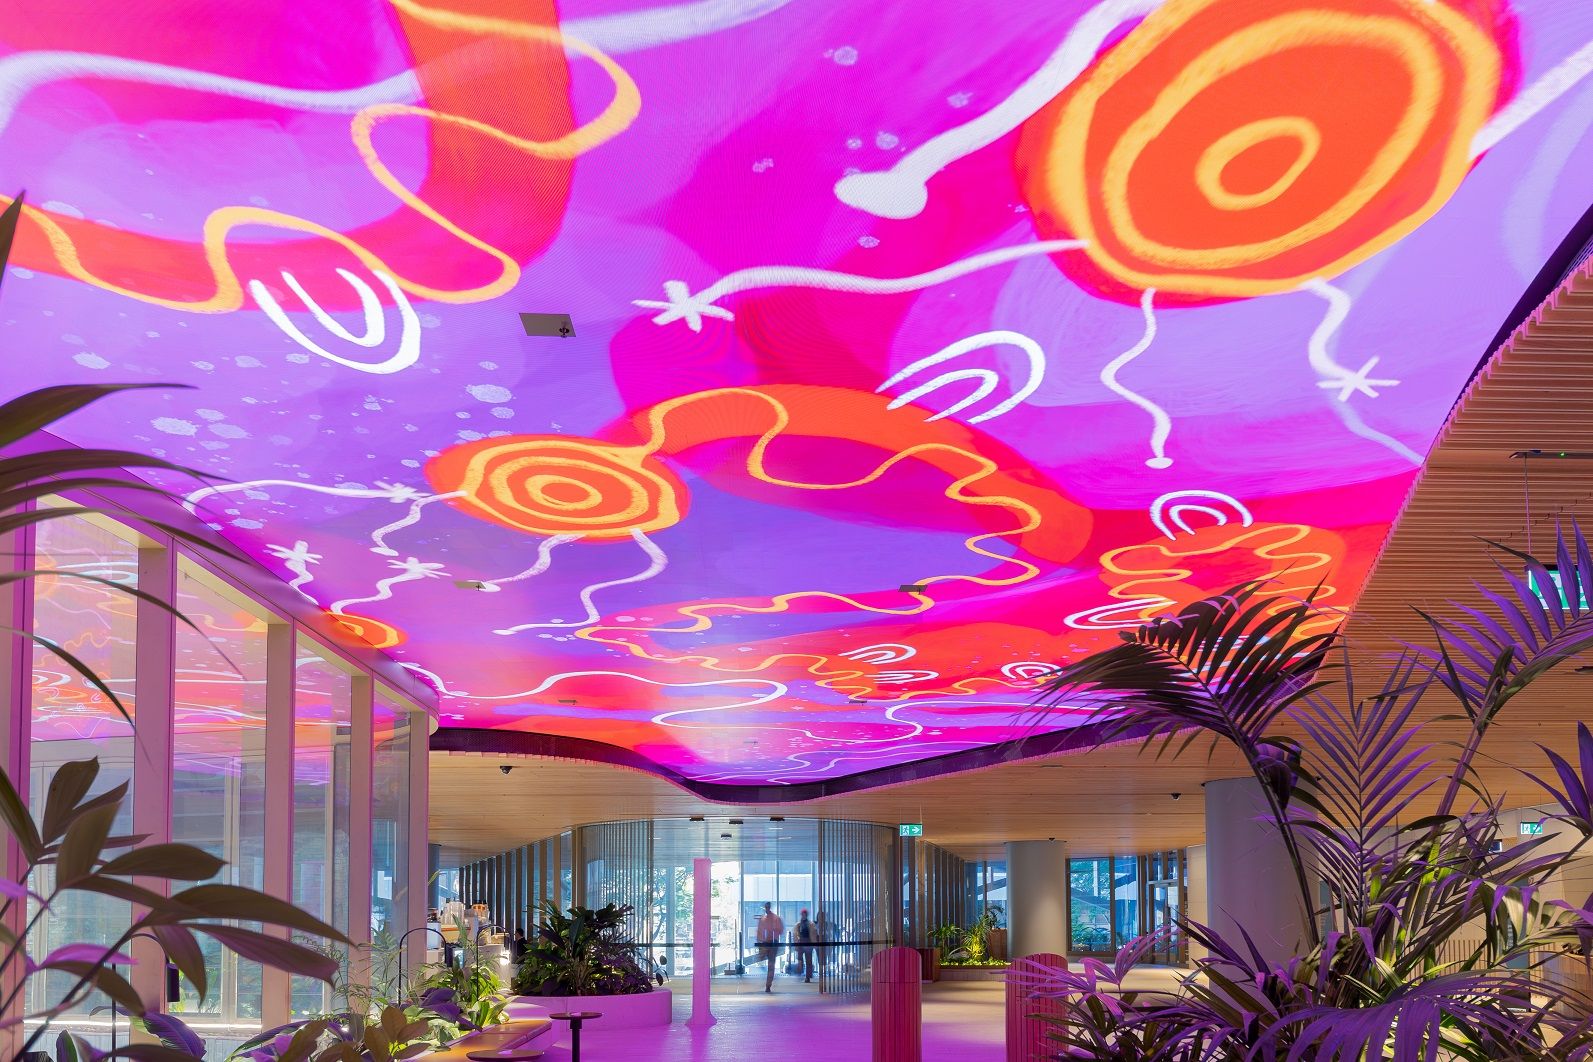 Photo of Mirvac Heritage Lanes commercial lobby foyer in Brisbane Australia showing digital placemaking art screen with vibrant blue indigenous Australian aboriginal artwork created by artist Rachael Sarra in partnership with VANDAL.